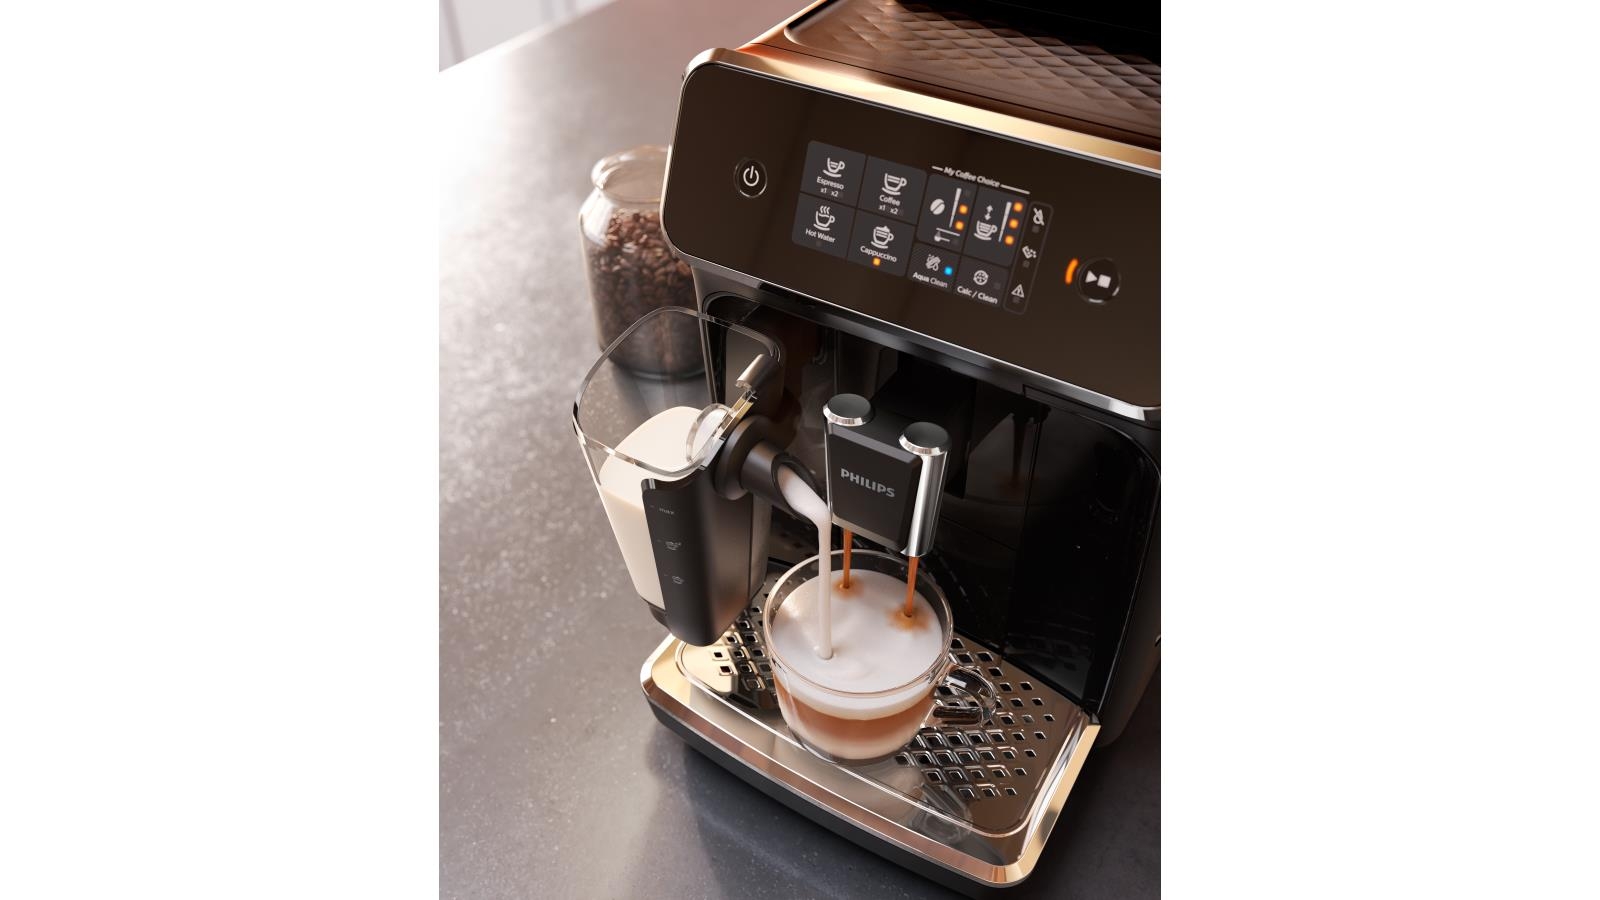 Philips 2200 Series LatteGo Fully Auto Espresso Machine, EP2231/40 - Coffee  Makers & Water Coolers